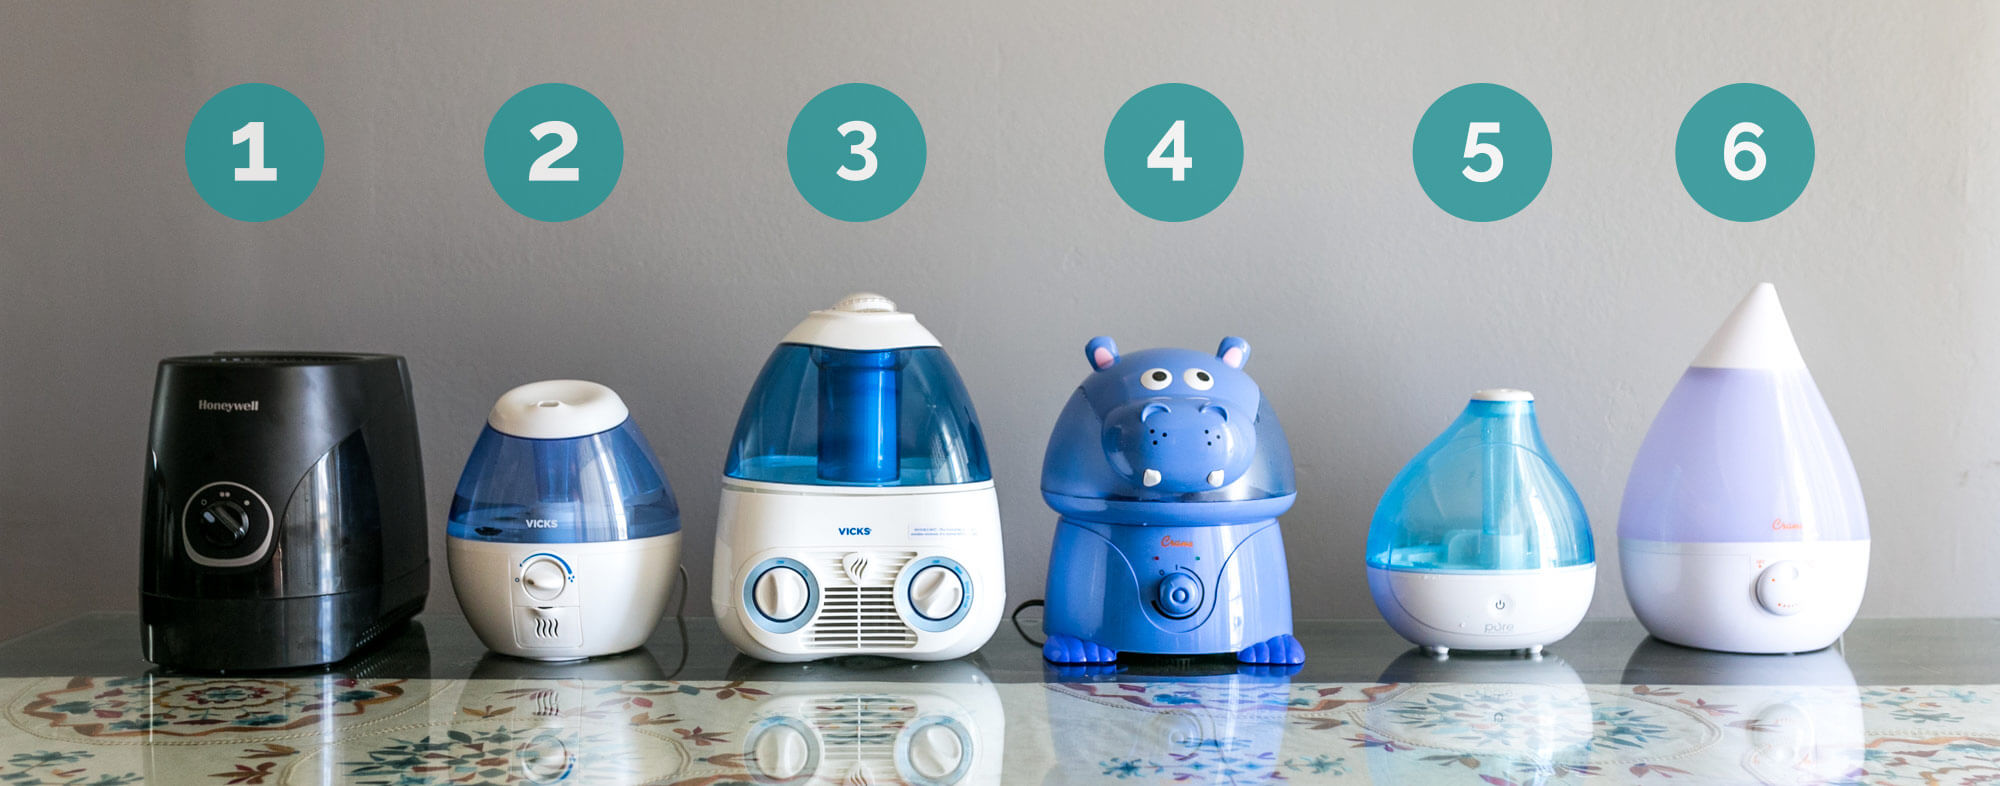 best humidifier to buy